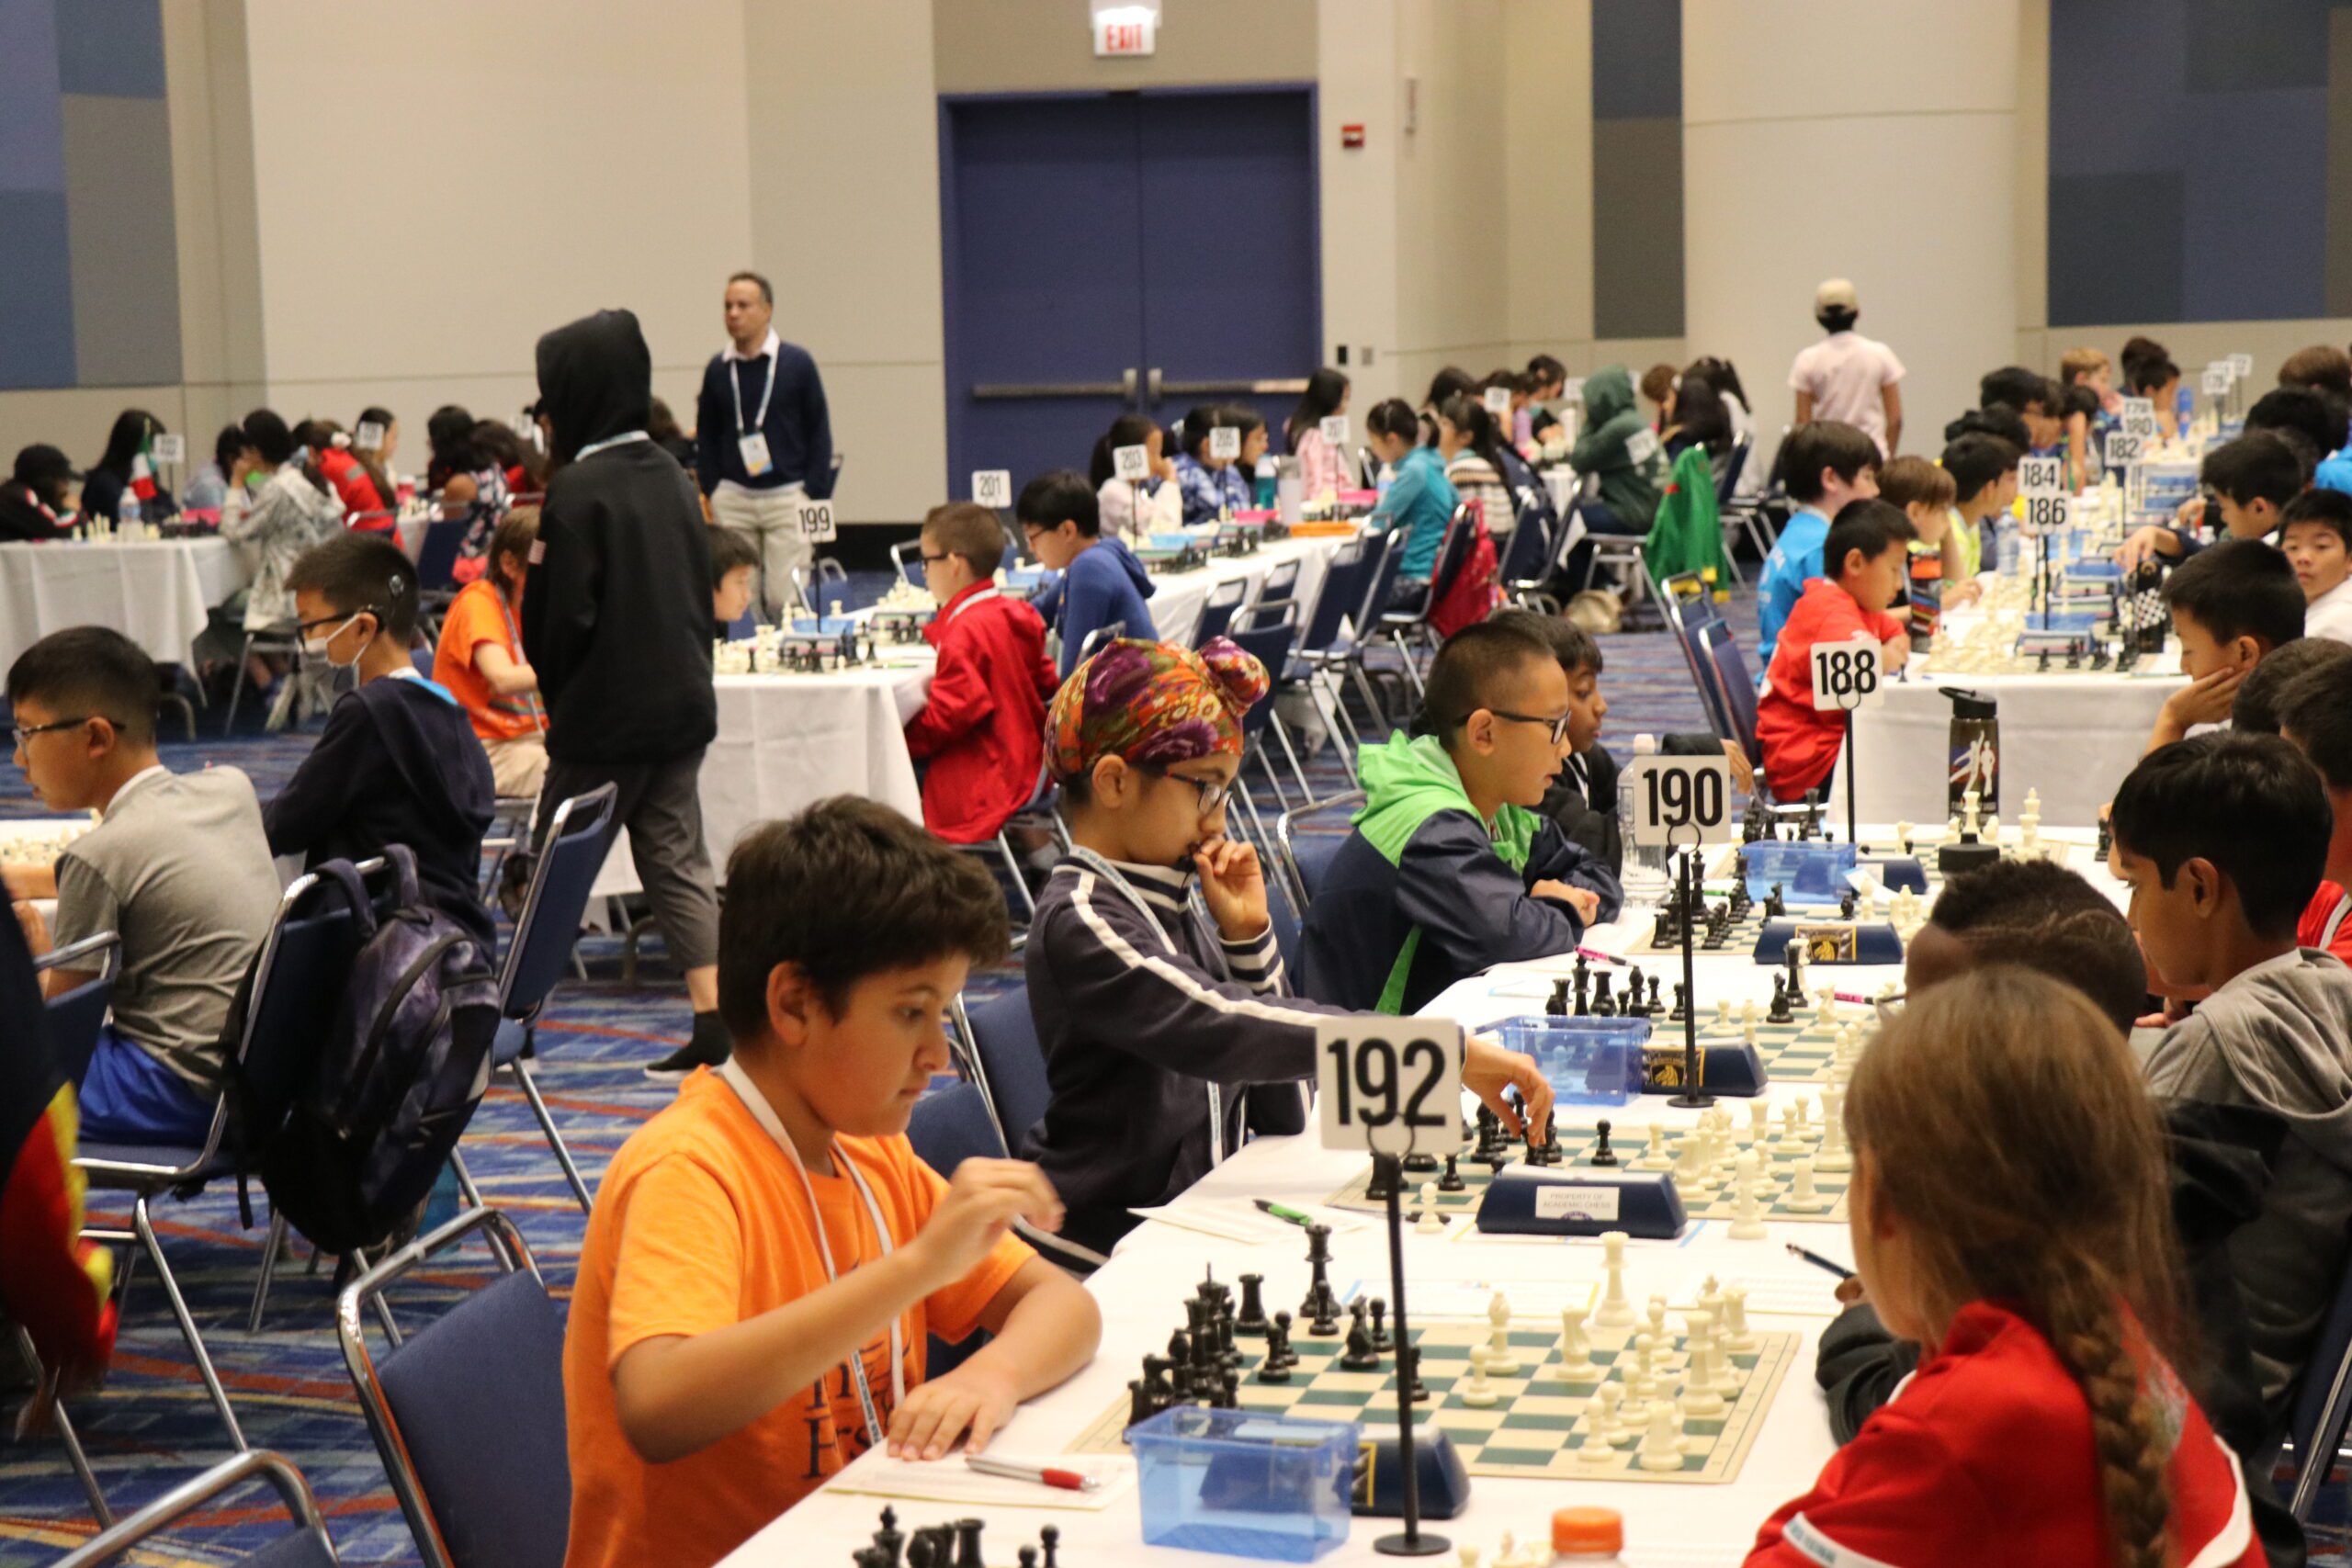 Colorful vibes at Pan-American Youth Chess Festival - The Chess Drum